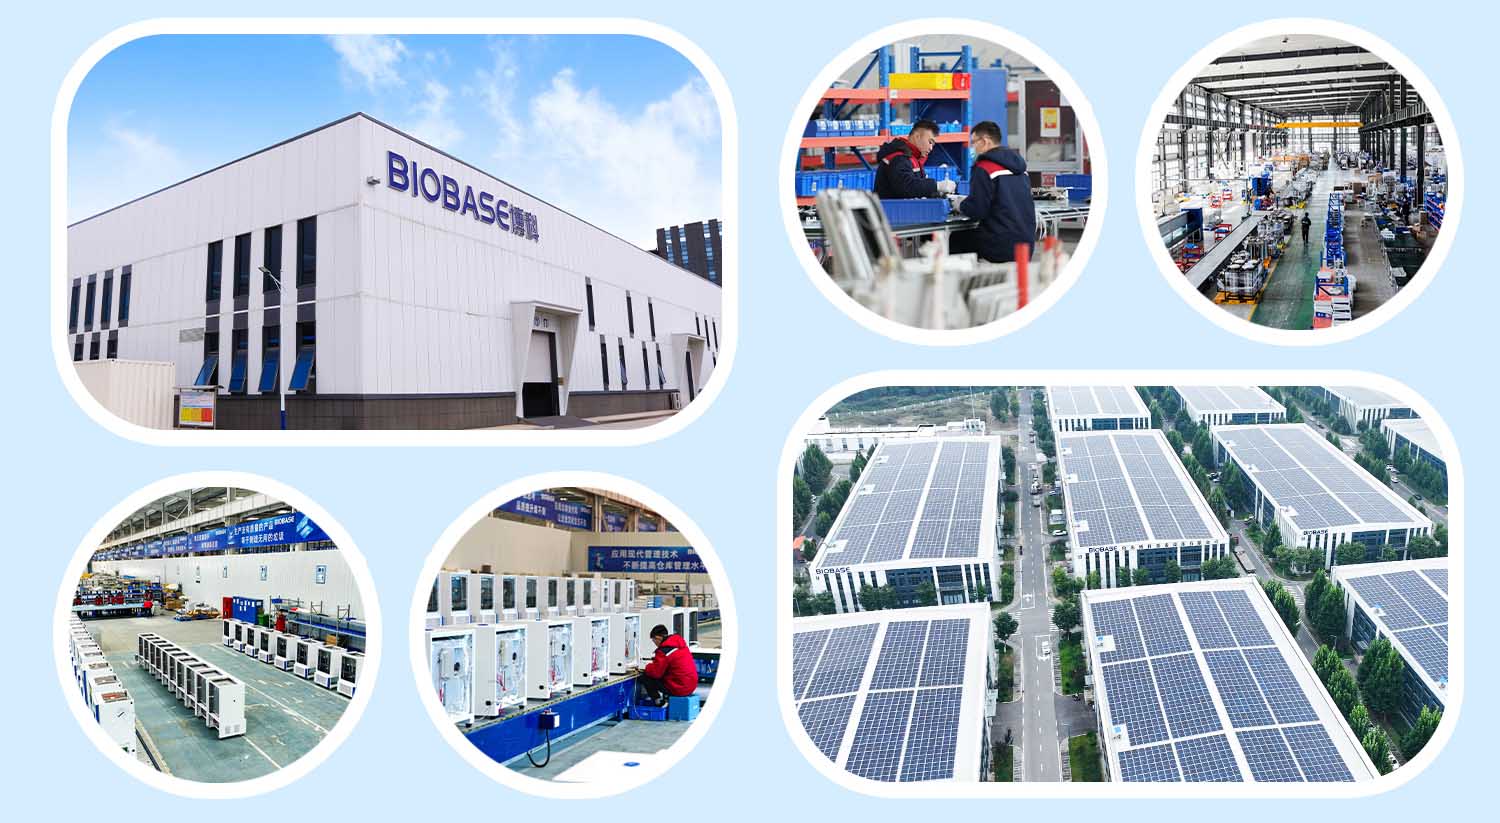 BIOBASE products advance healthcare in the Middle East